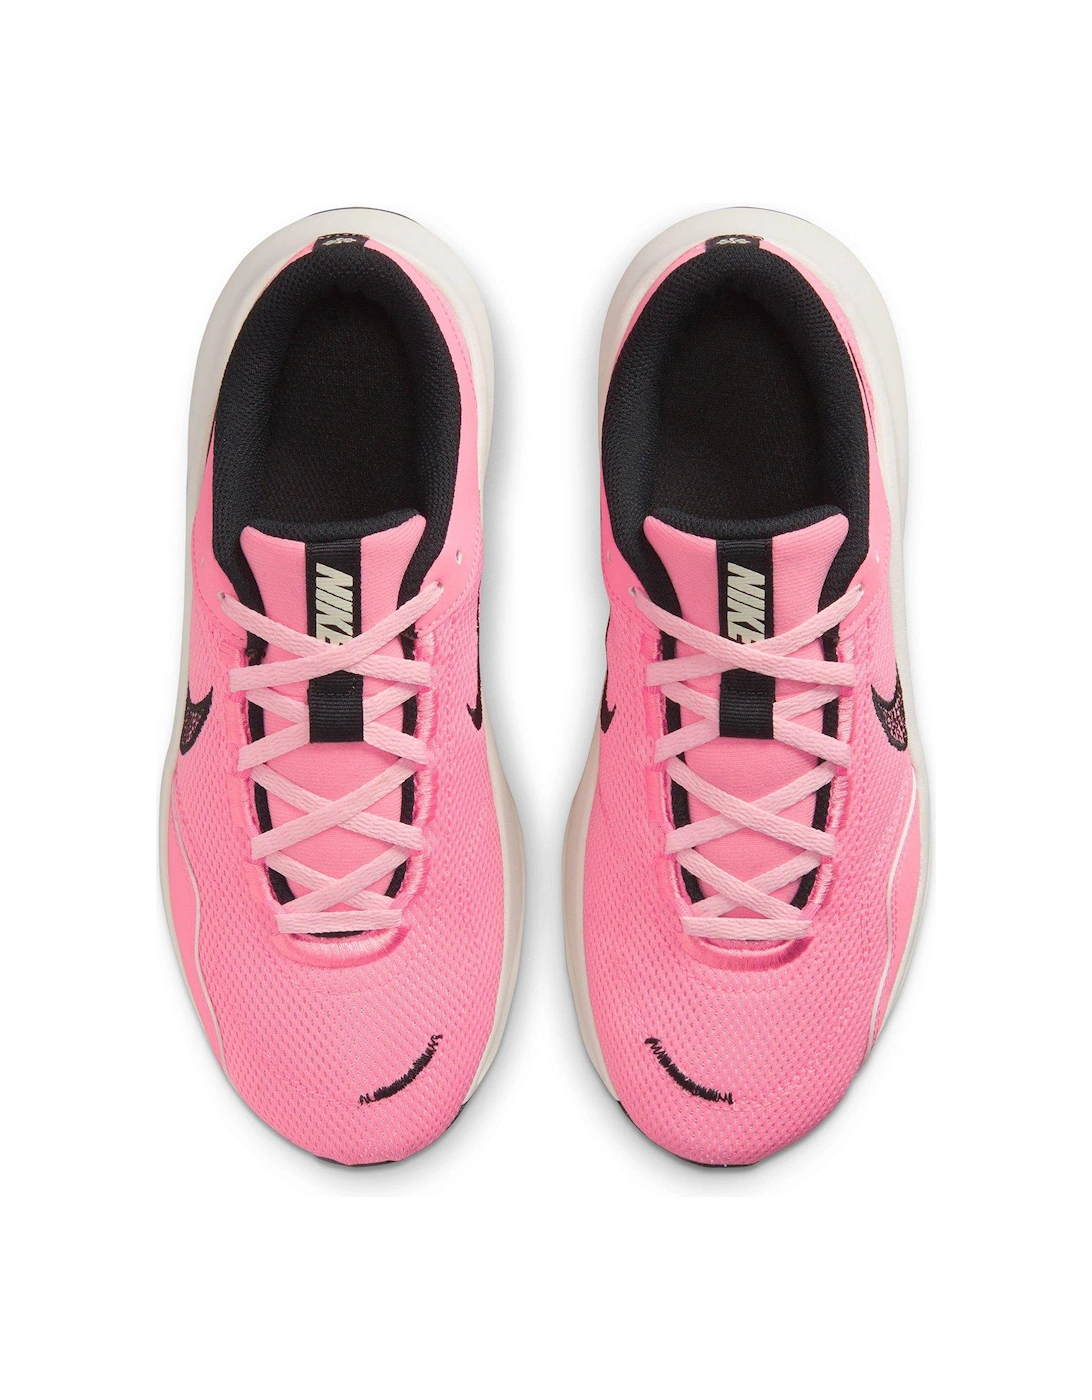 Legend Essential 3 Next Nature Trainers - Pink